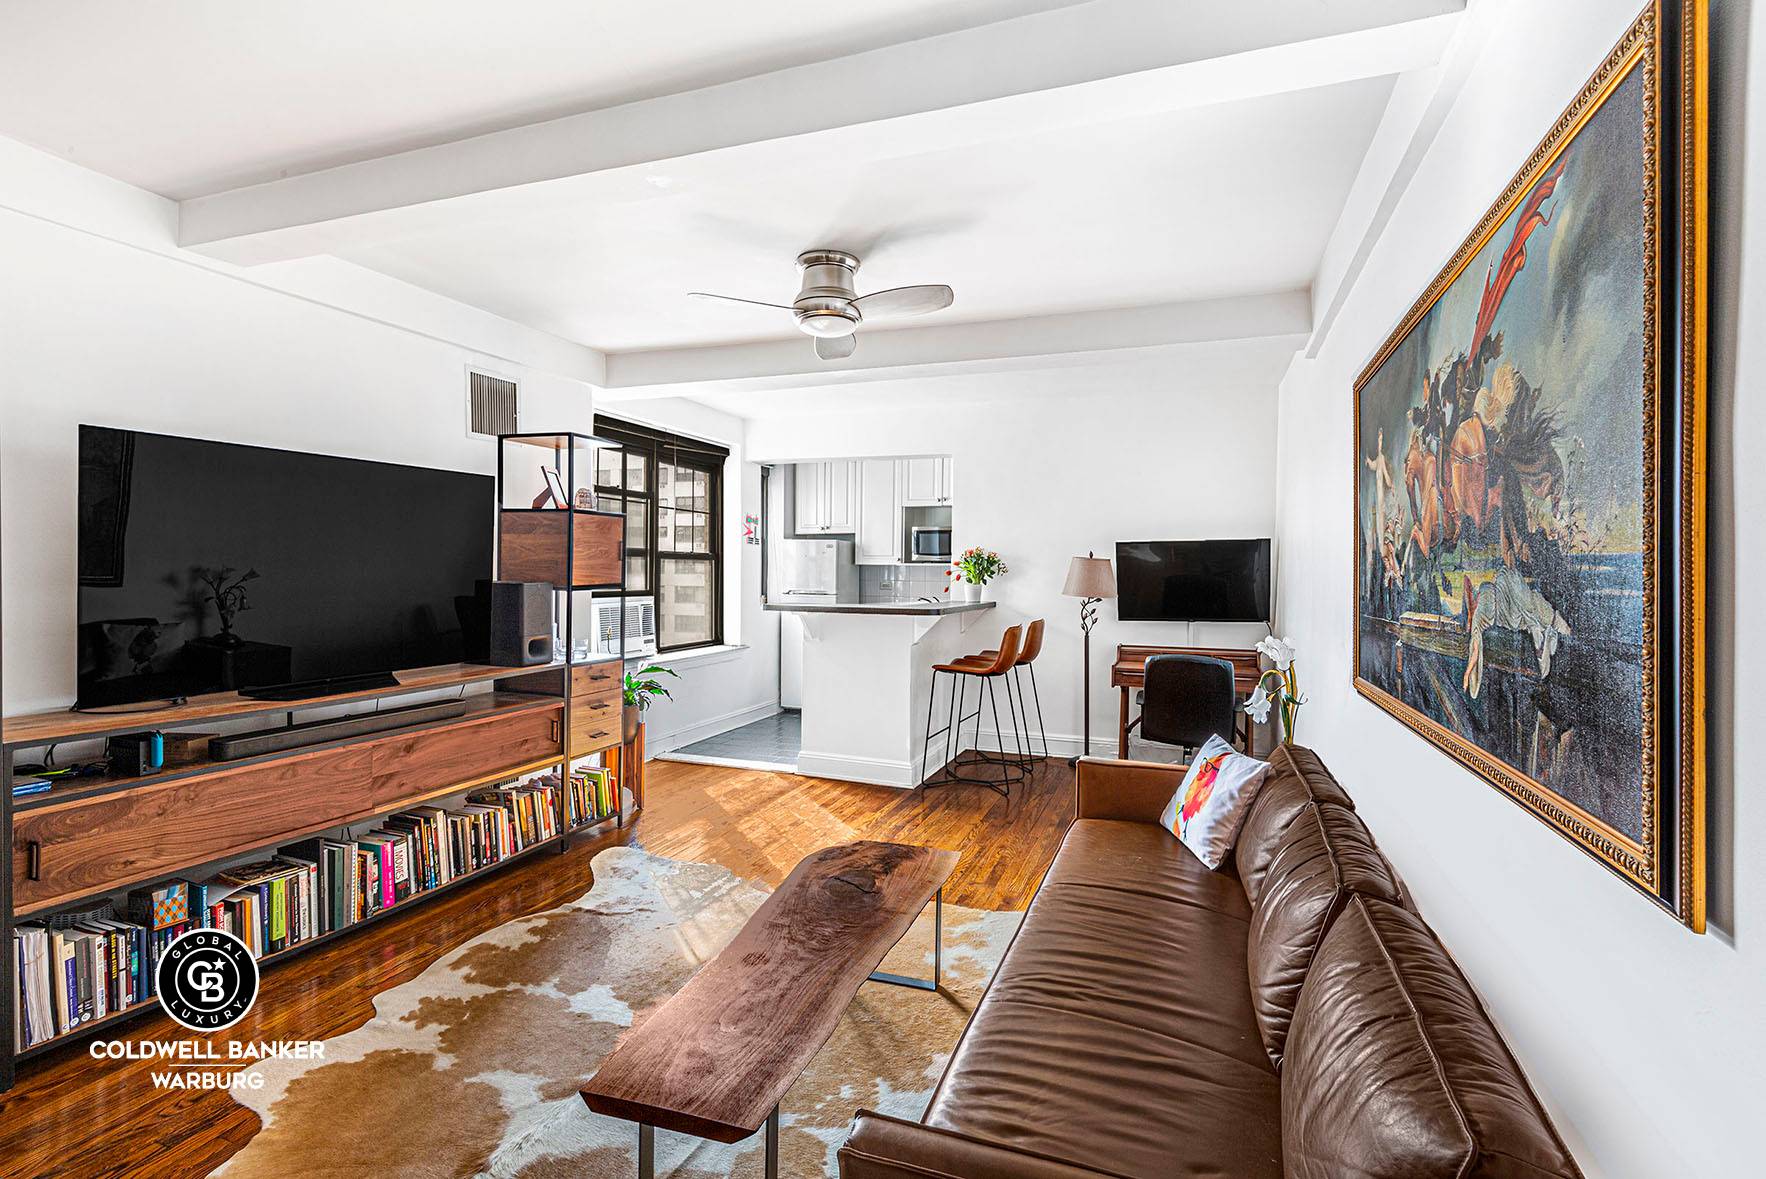 This is the perfect apartment to cut the rental cord and become an owner.